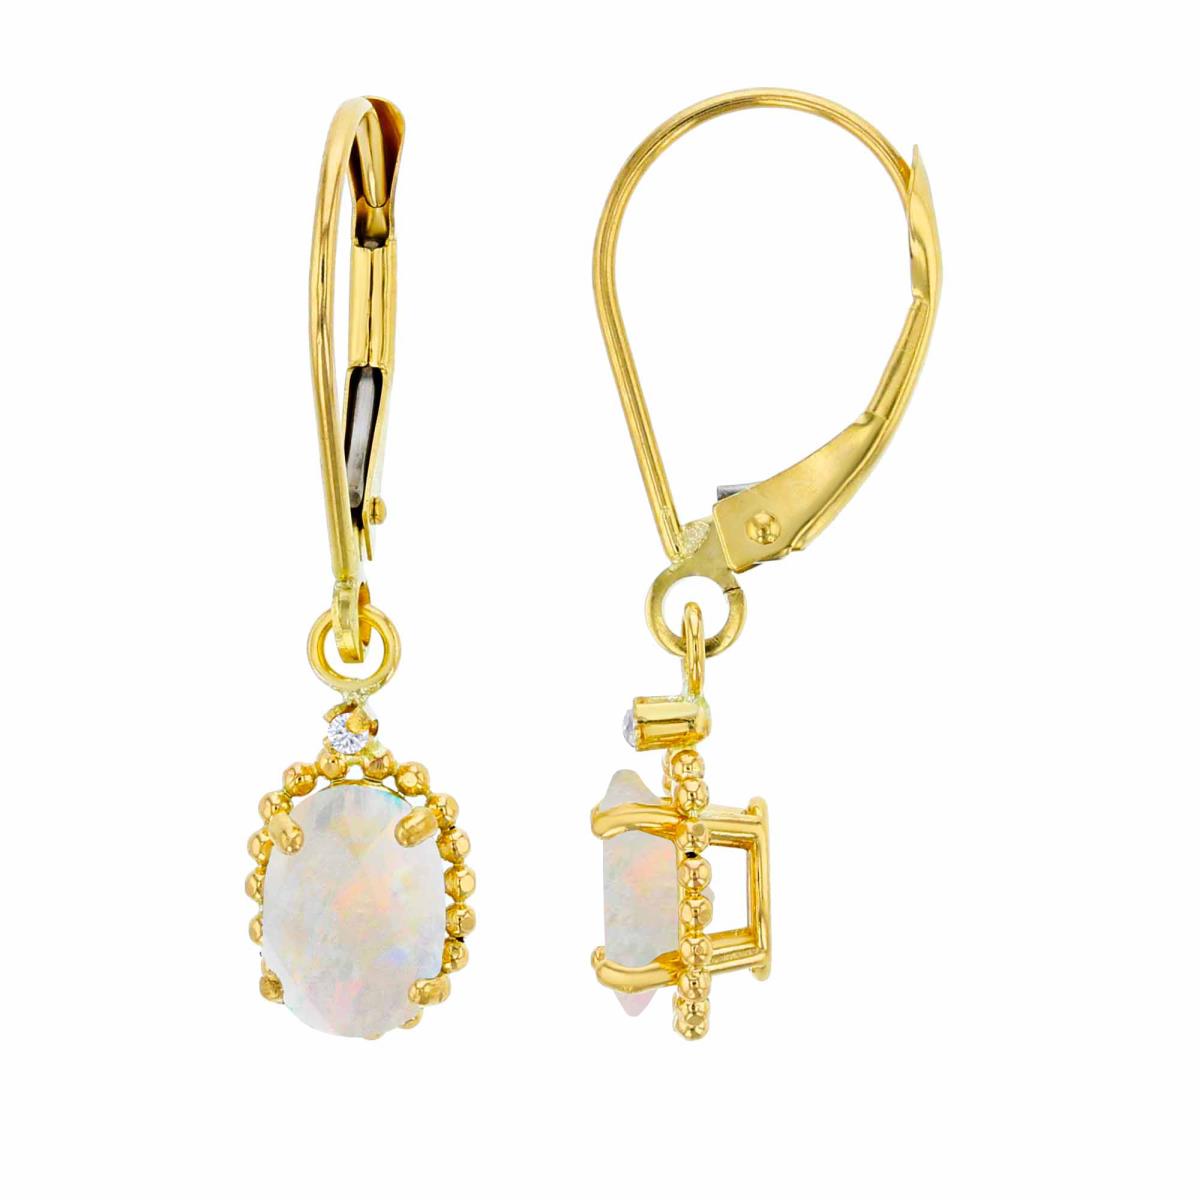 10K Yellow Gold 1.25mm Rd White Topaz & 6x4mm Ov Created Opal Bead Frame Drop Lever-Back Earring